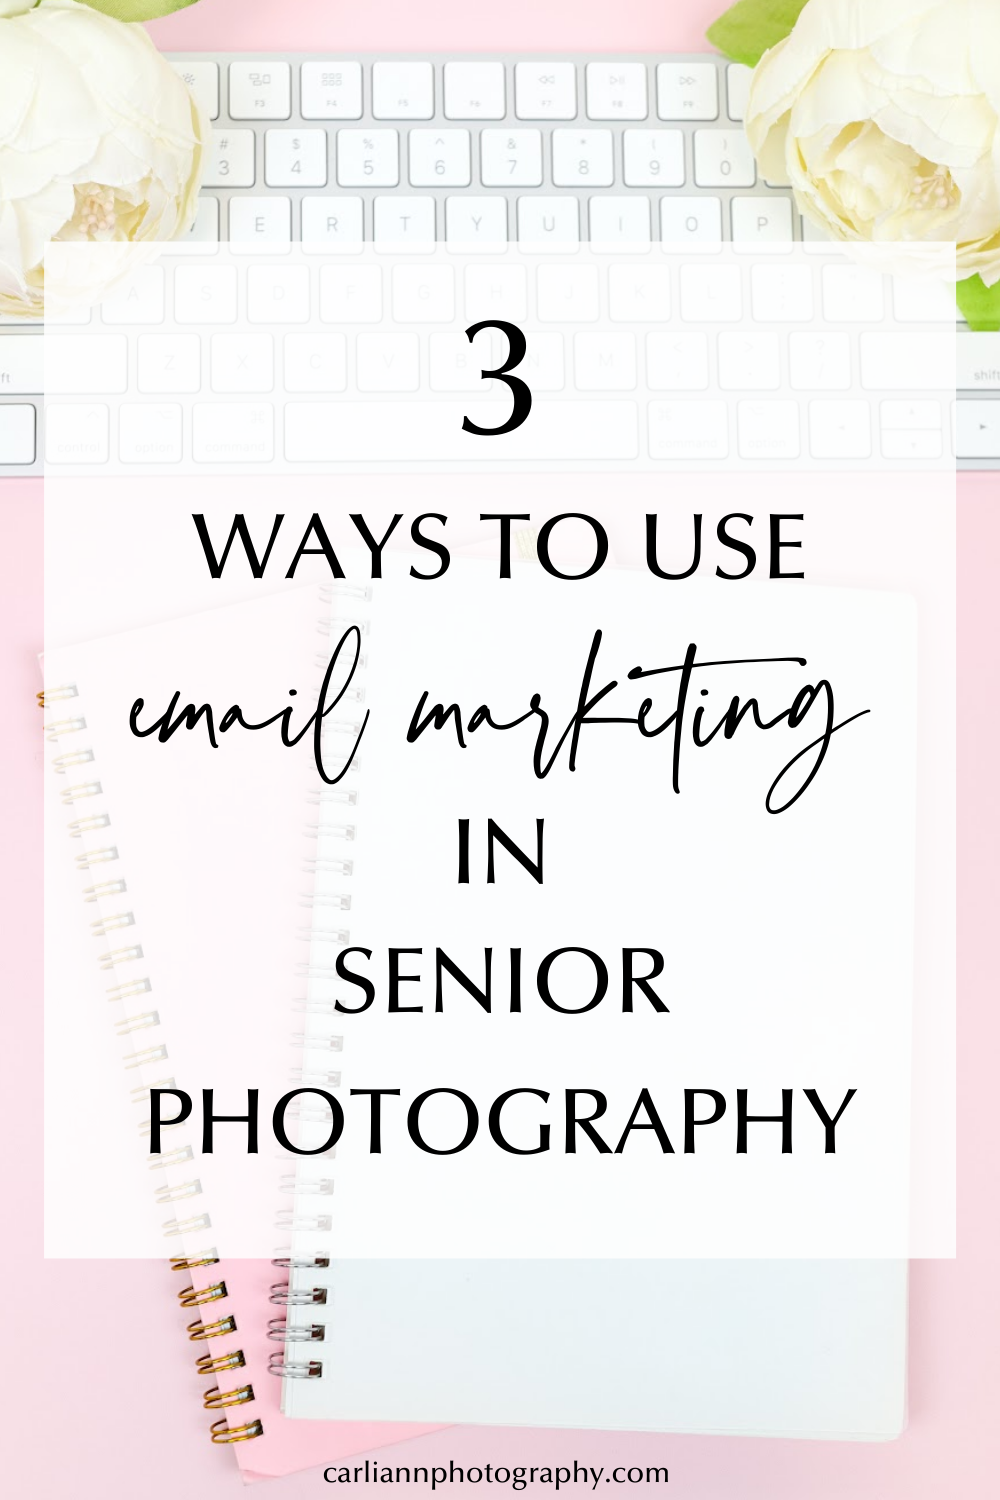 Email Marketing in Senior Photography